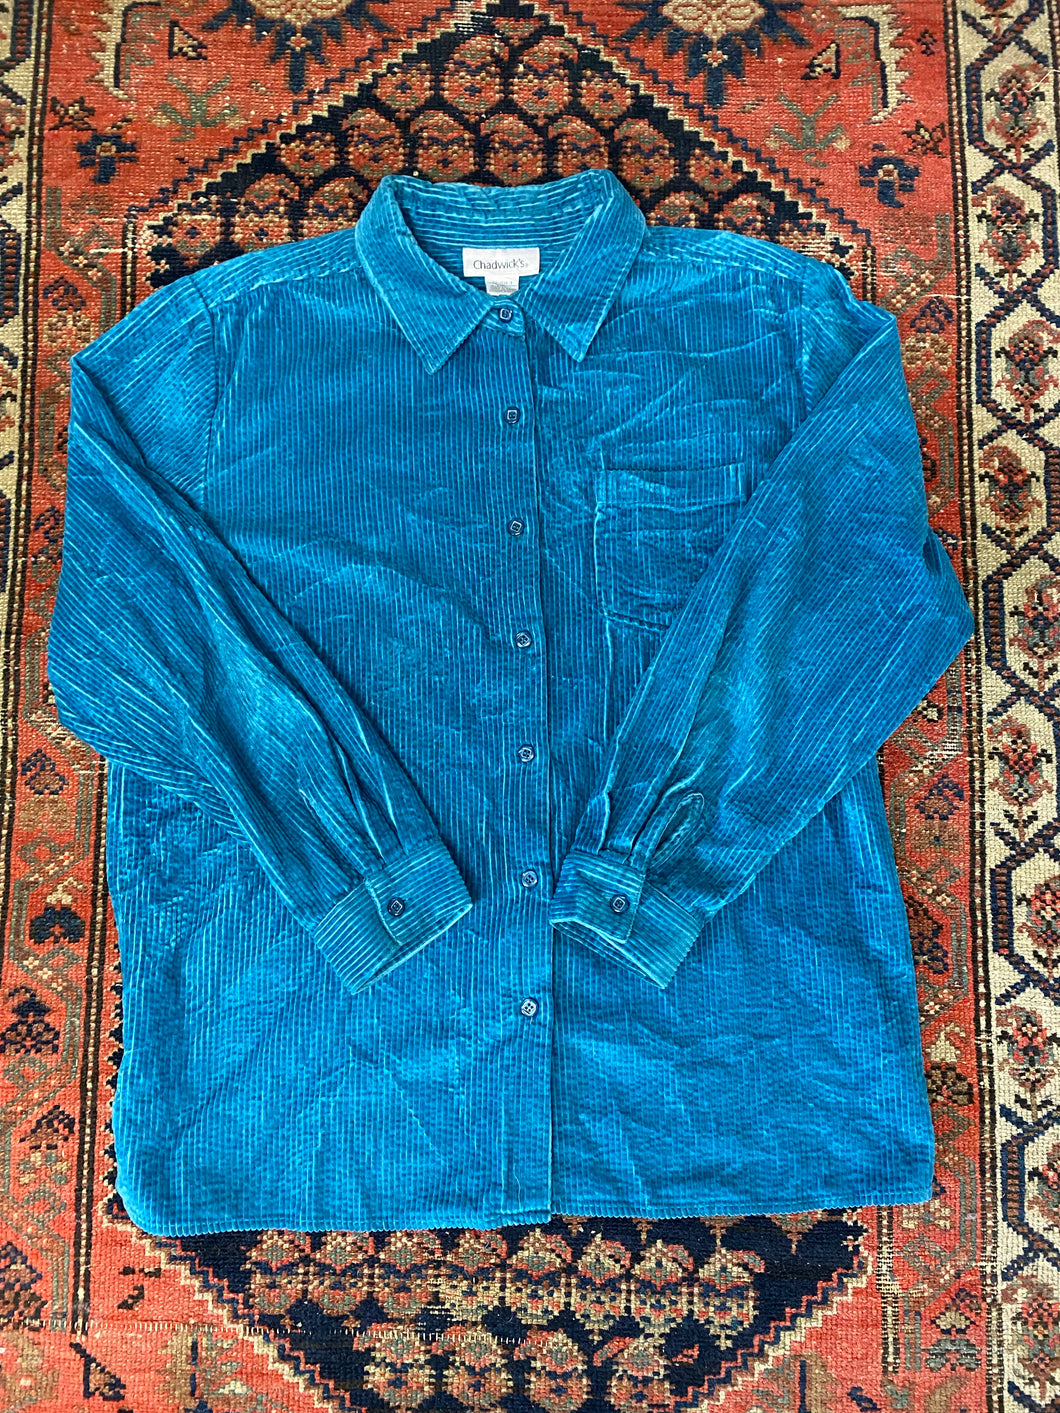 Vintage Thick Cord Button Up Shirt - L